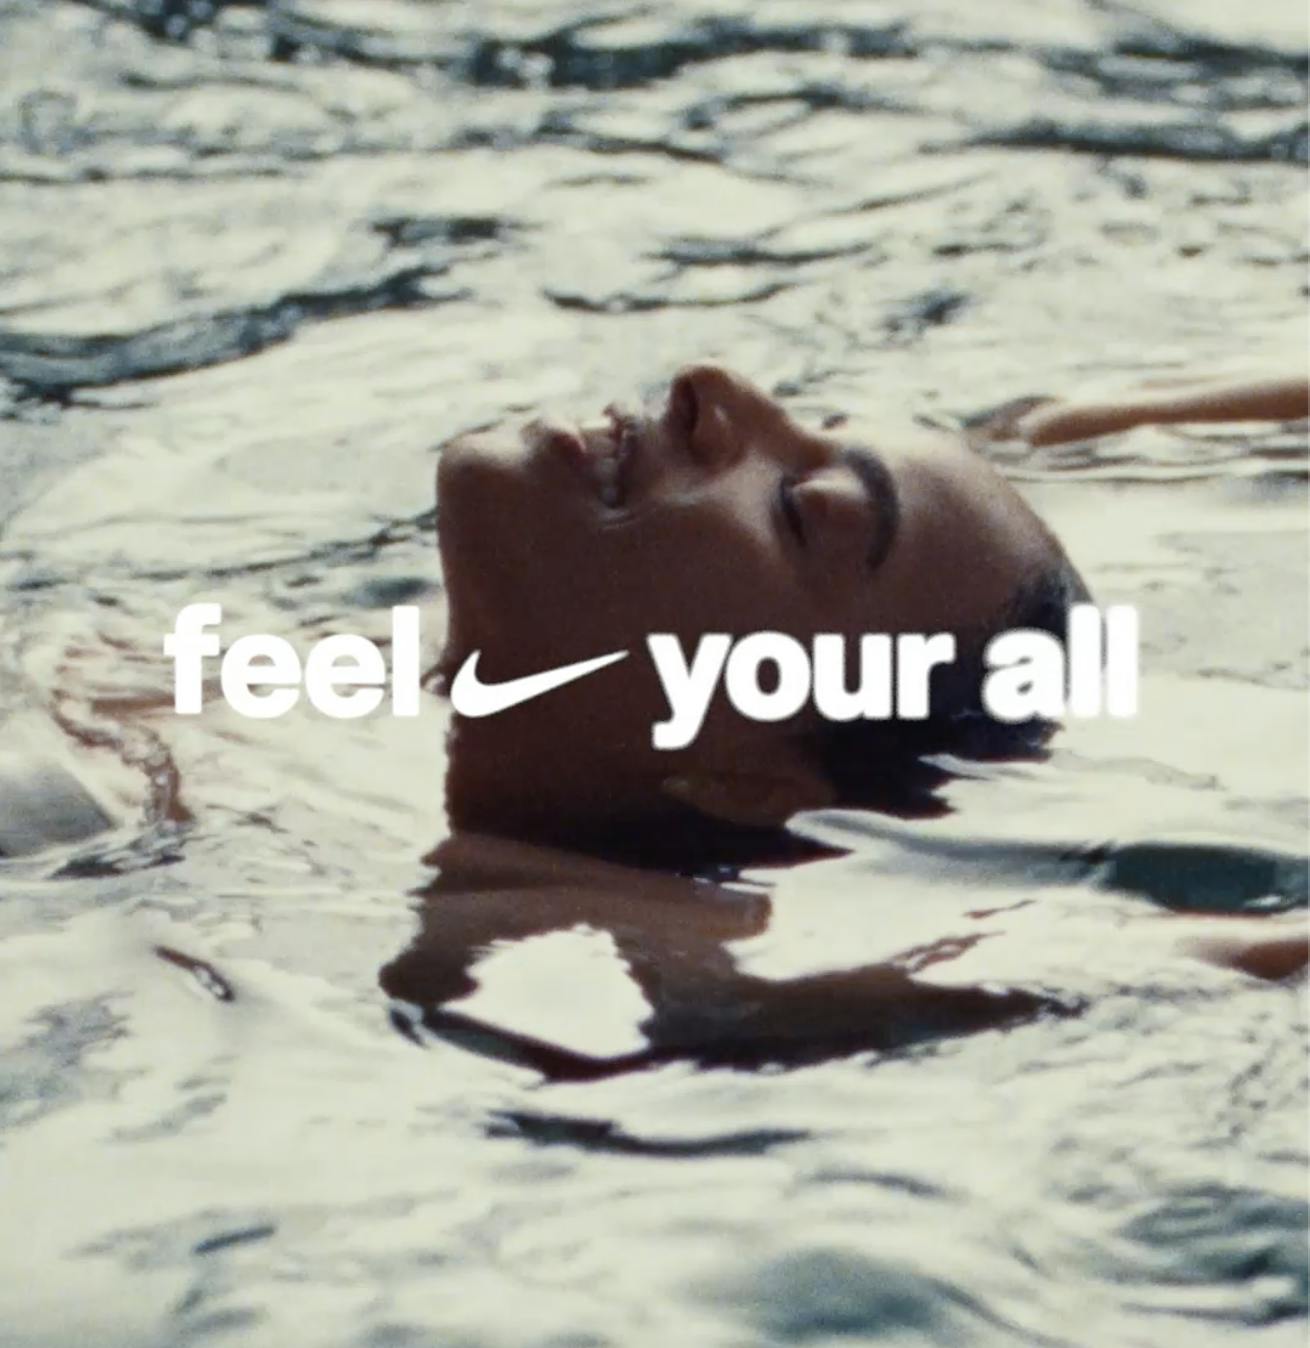 Nike ad for feel your all